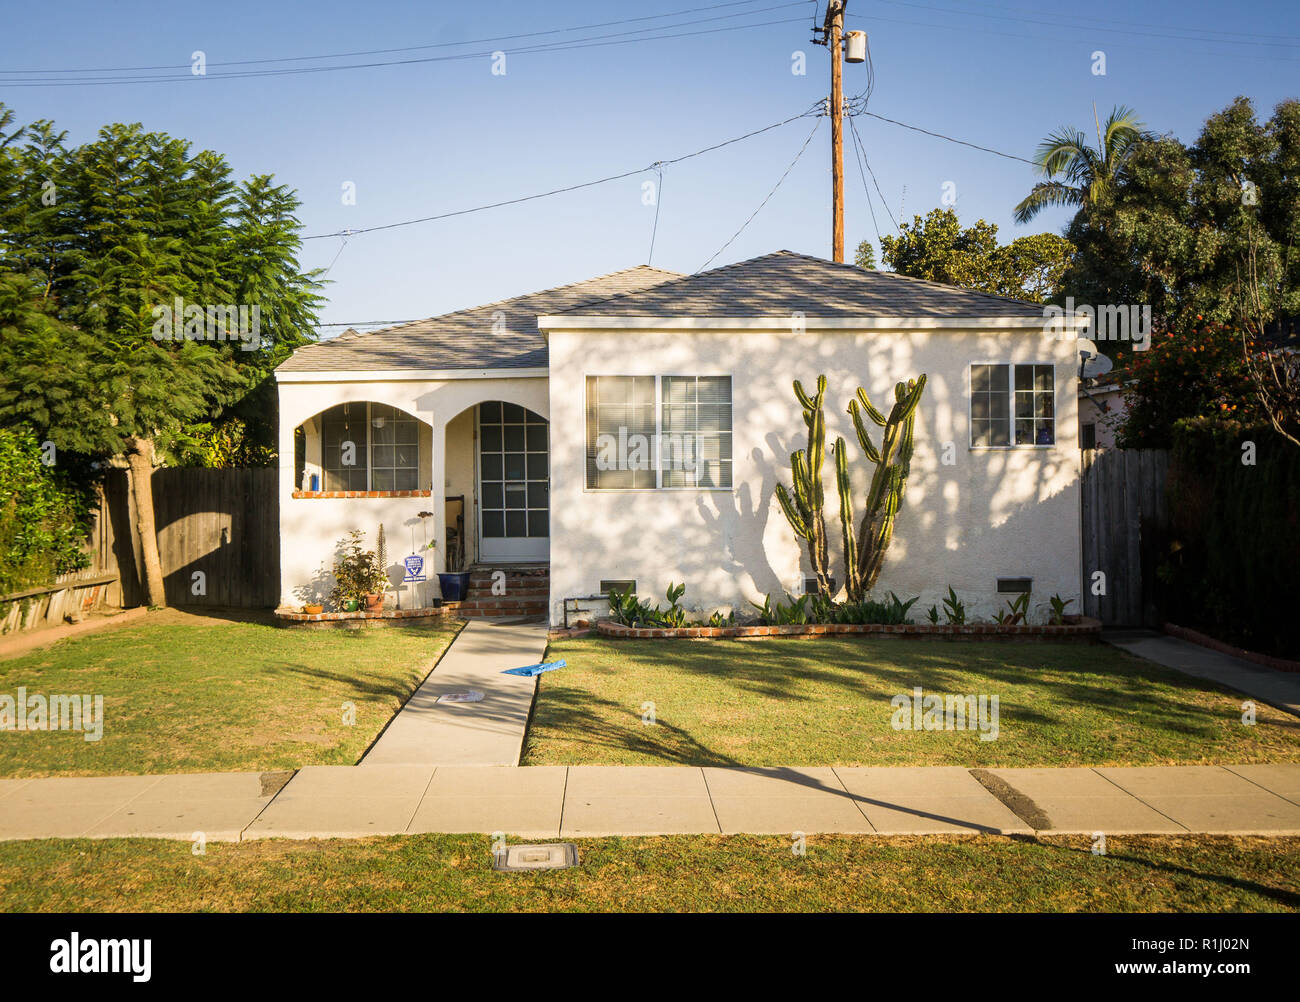 A typical and modest suburban home in Venice Beach, Los Angeles, California Stock Photo